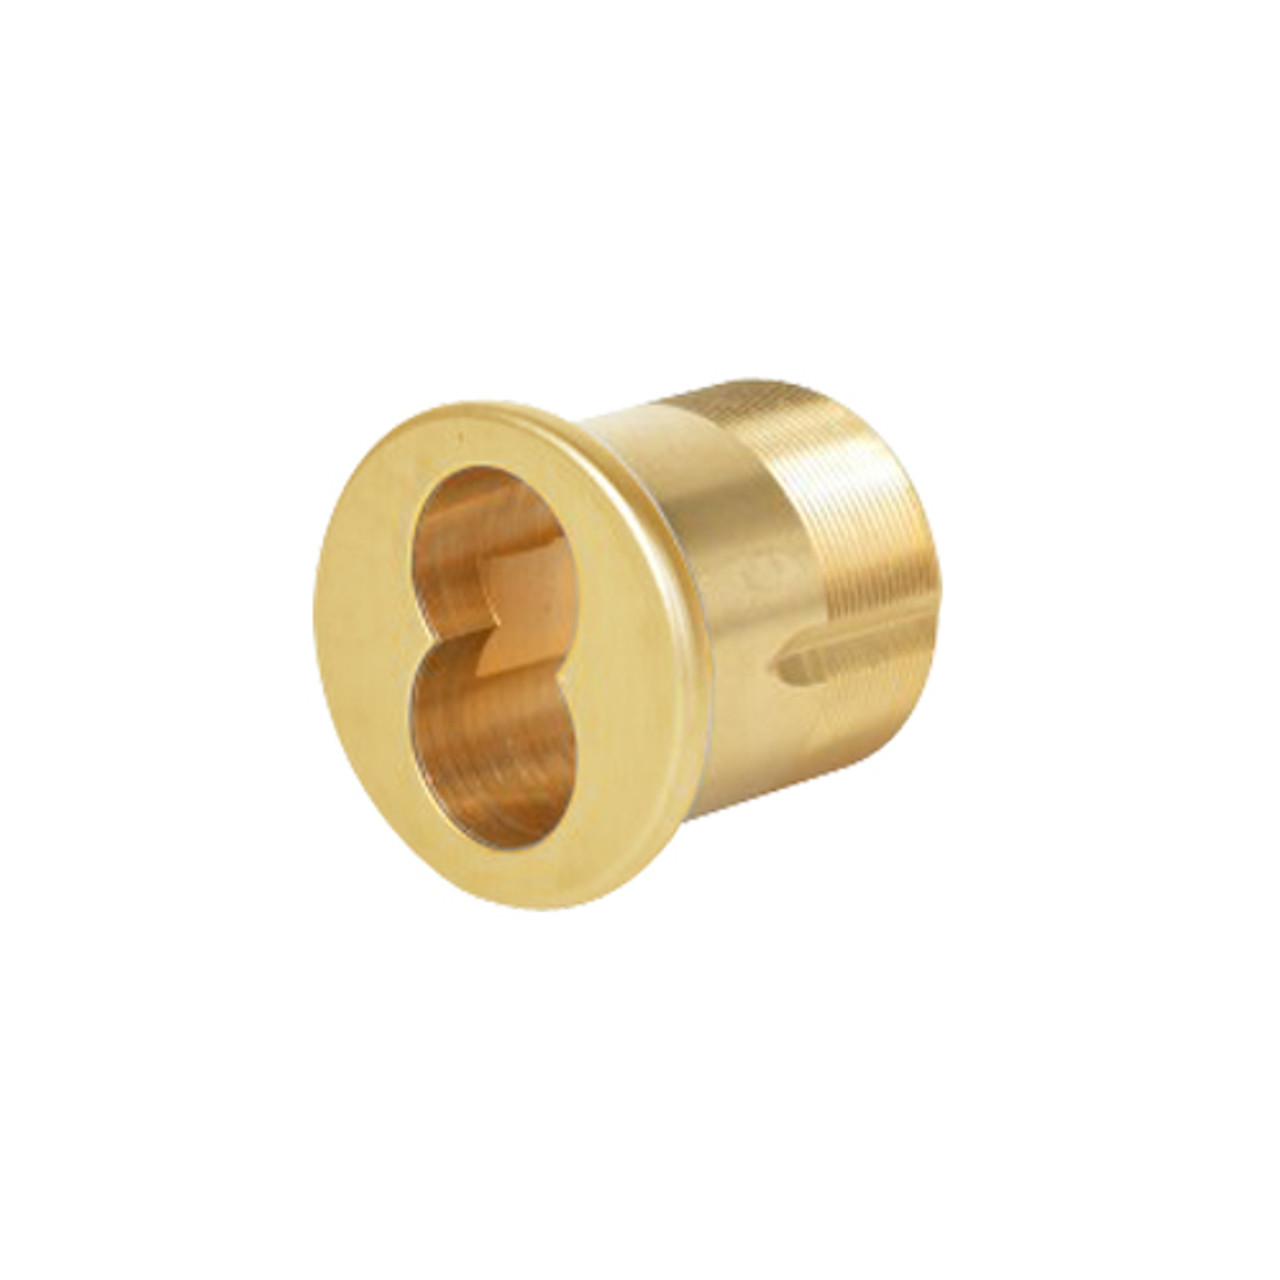 CR1070-134-A01-7-605 Corbin Mortise Interchangeable Core Housing with Cloverleaf Cam in Bright Brass Finish